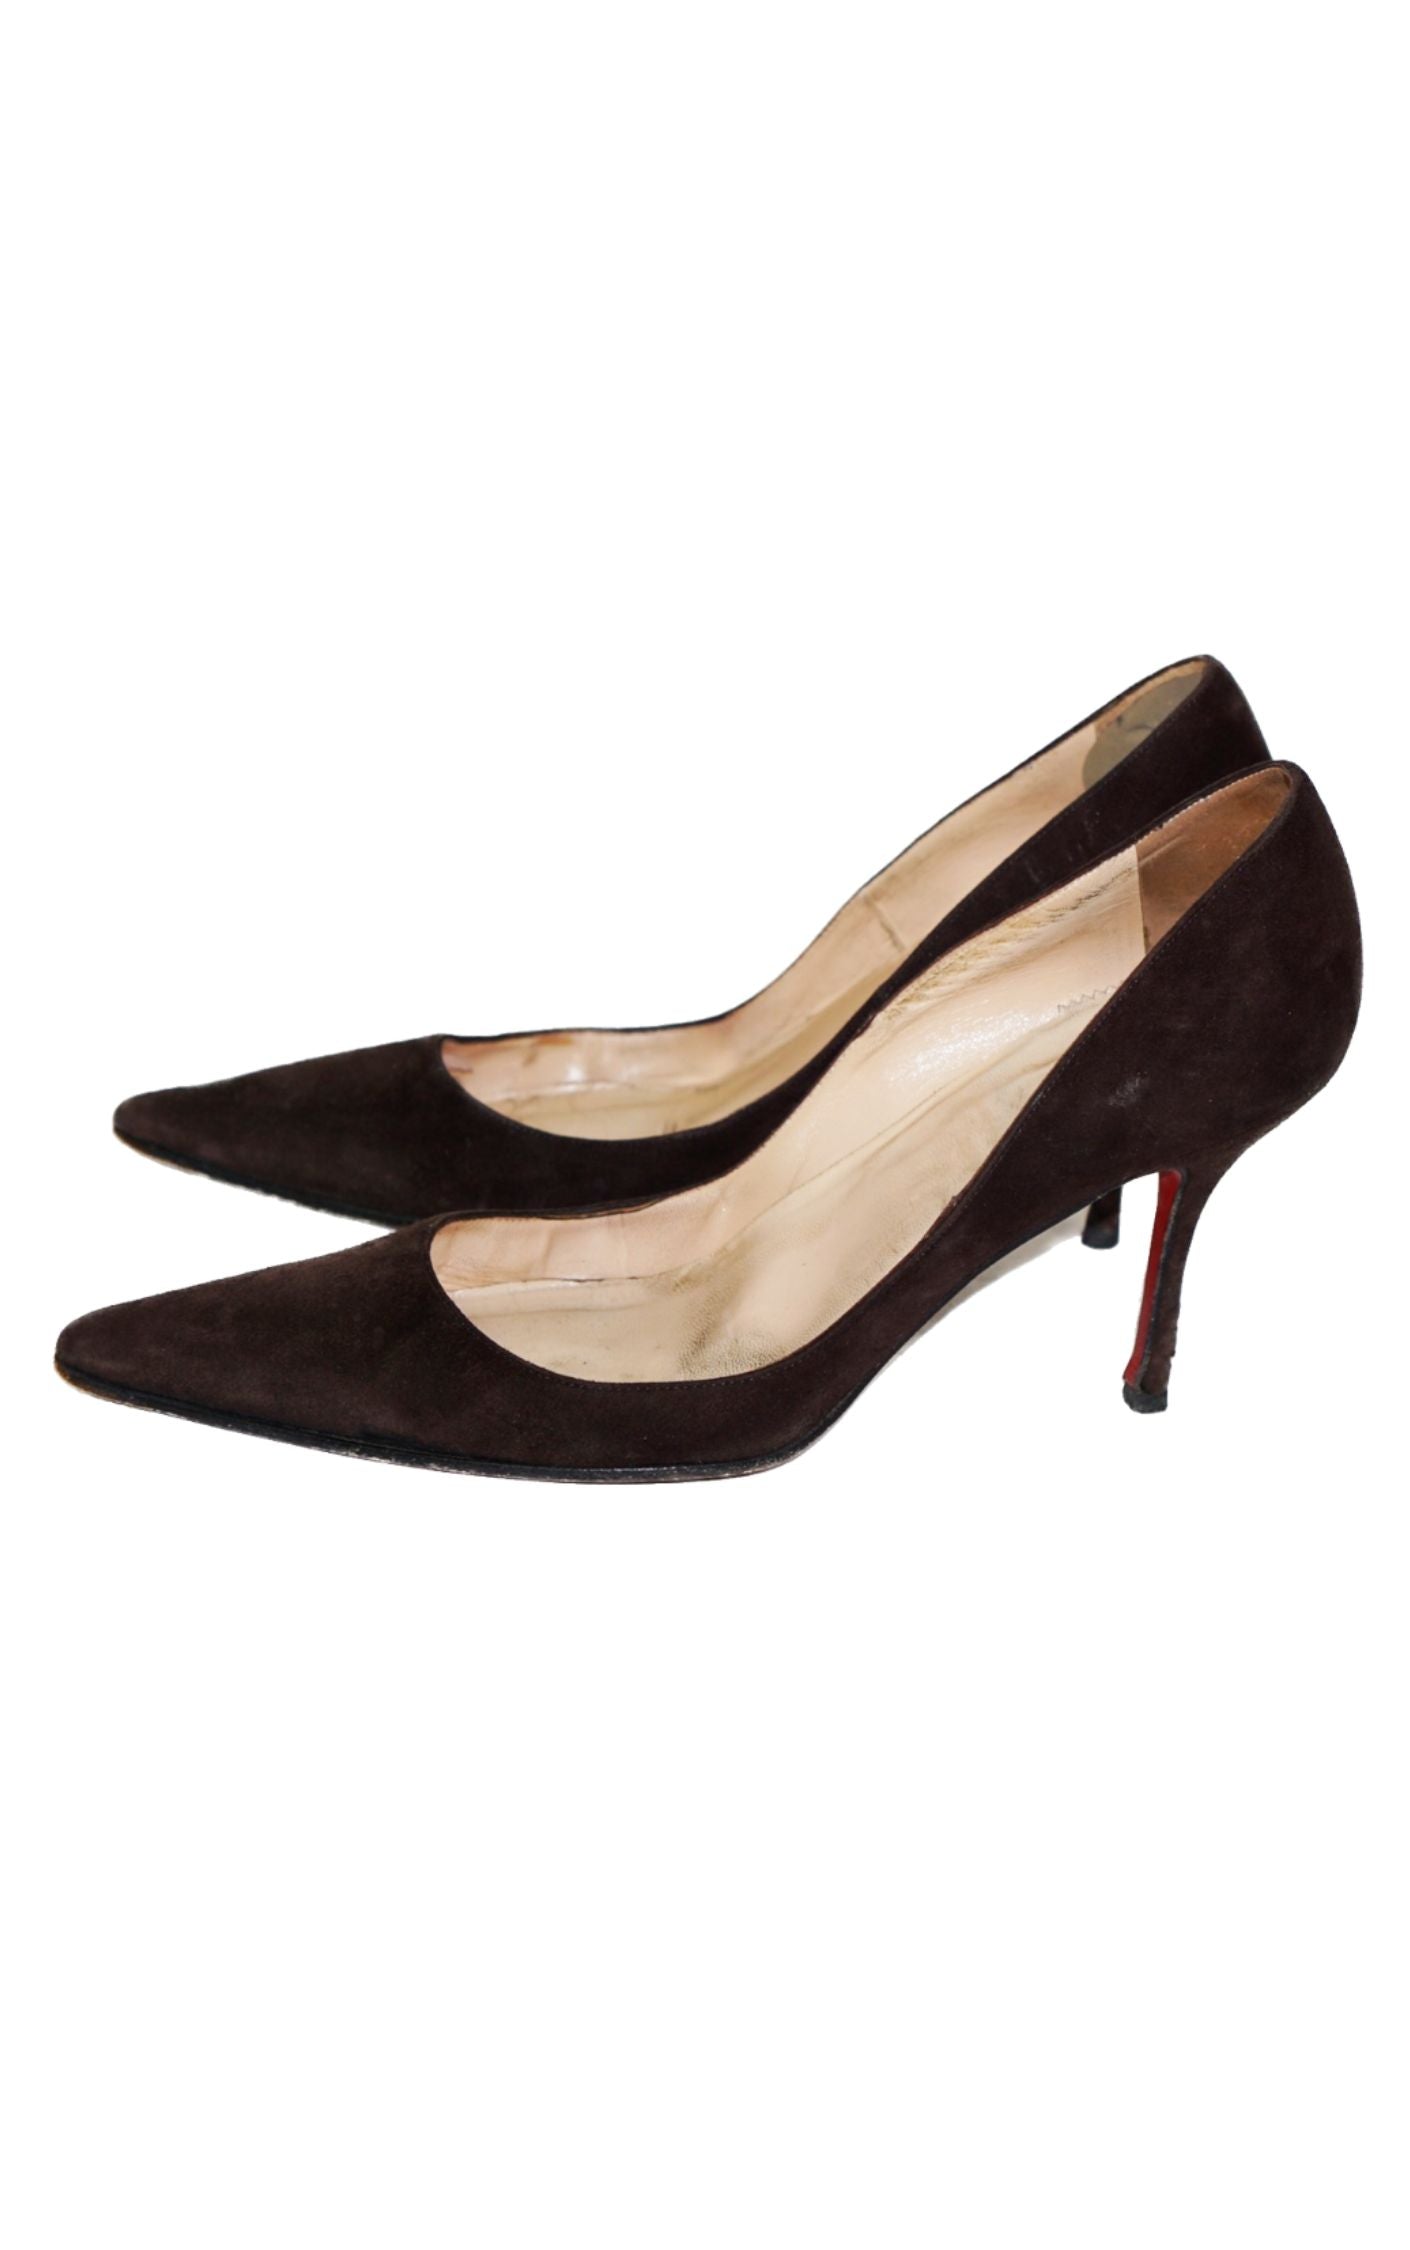 CHRISTIAN LOUBOUTIN Brown Suede Pumps resellum